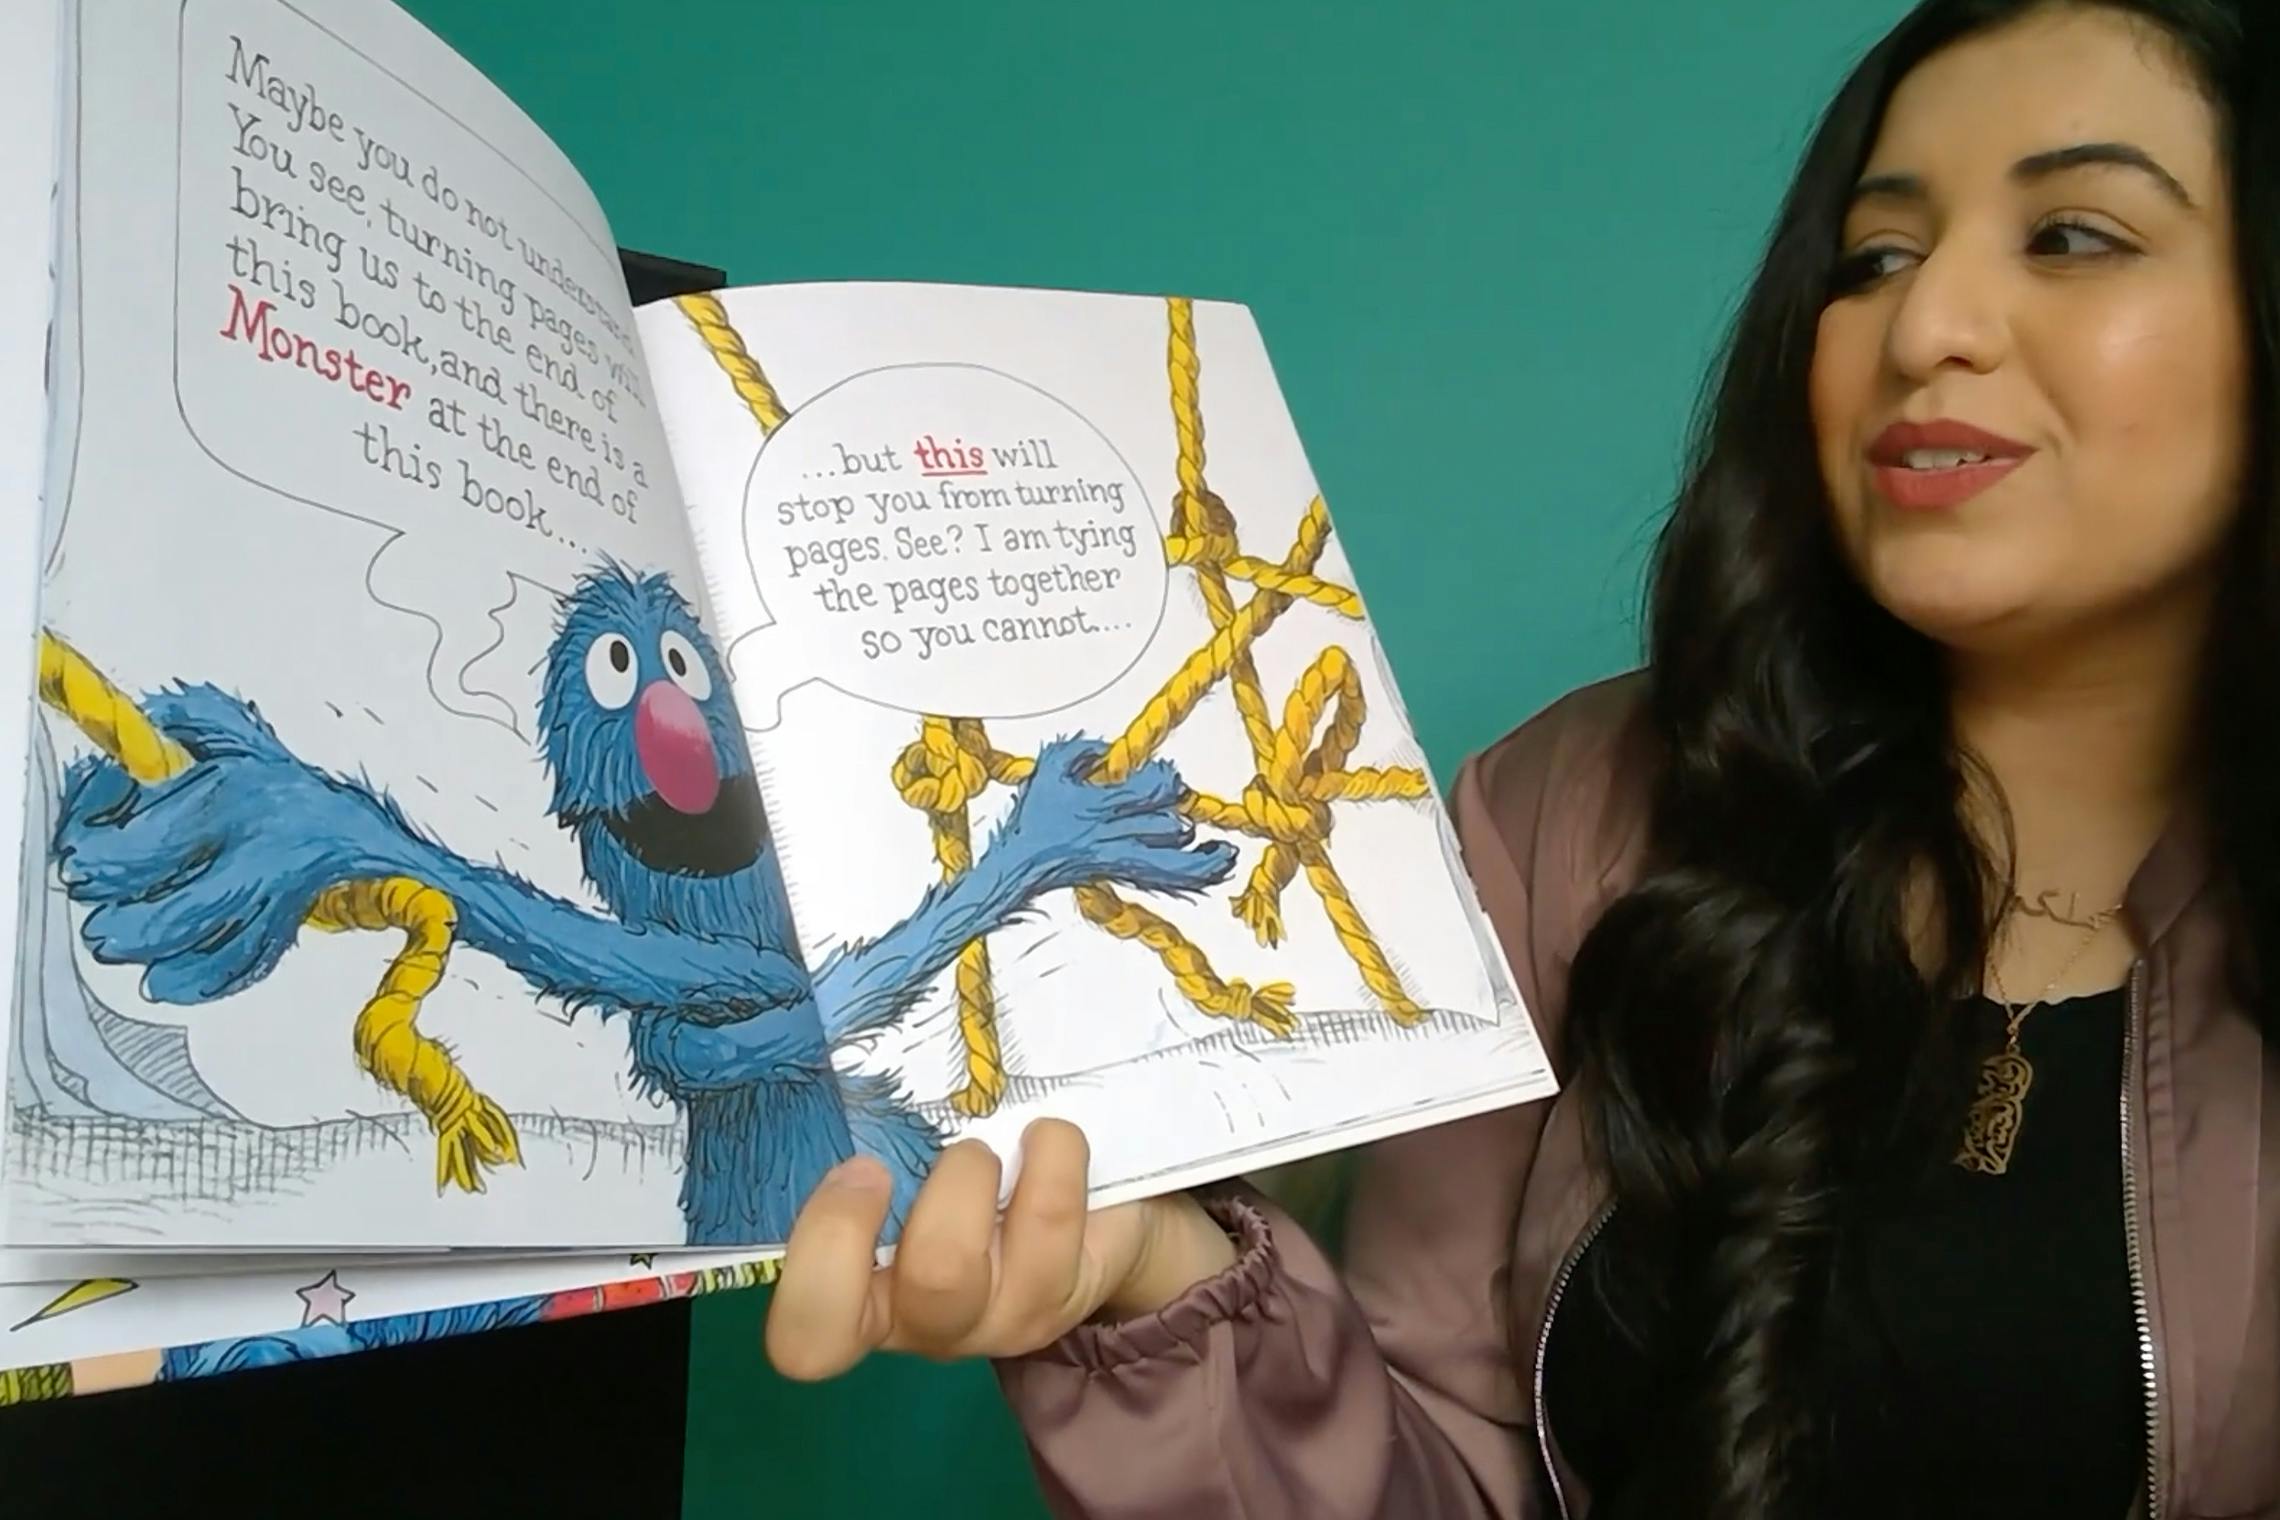 A woman reading a children's book, showing it to the camera.